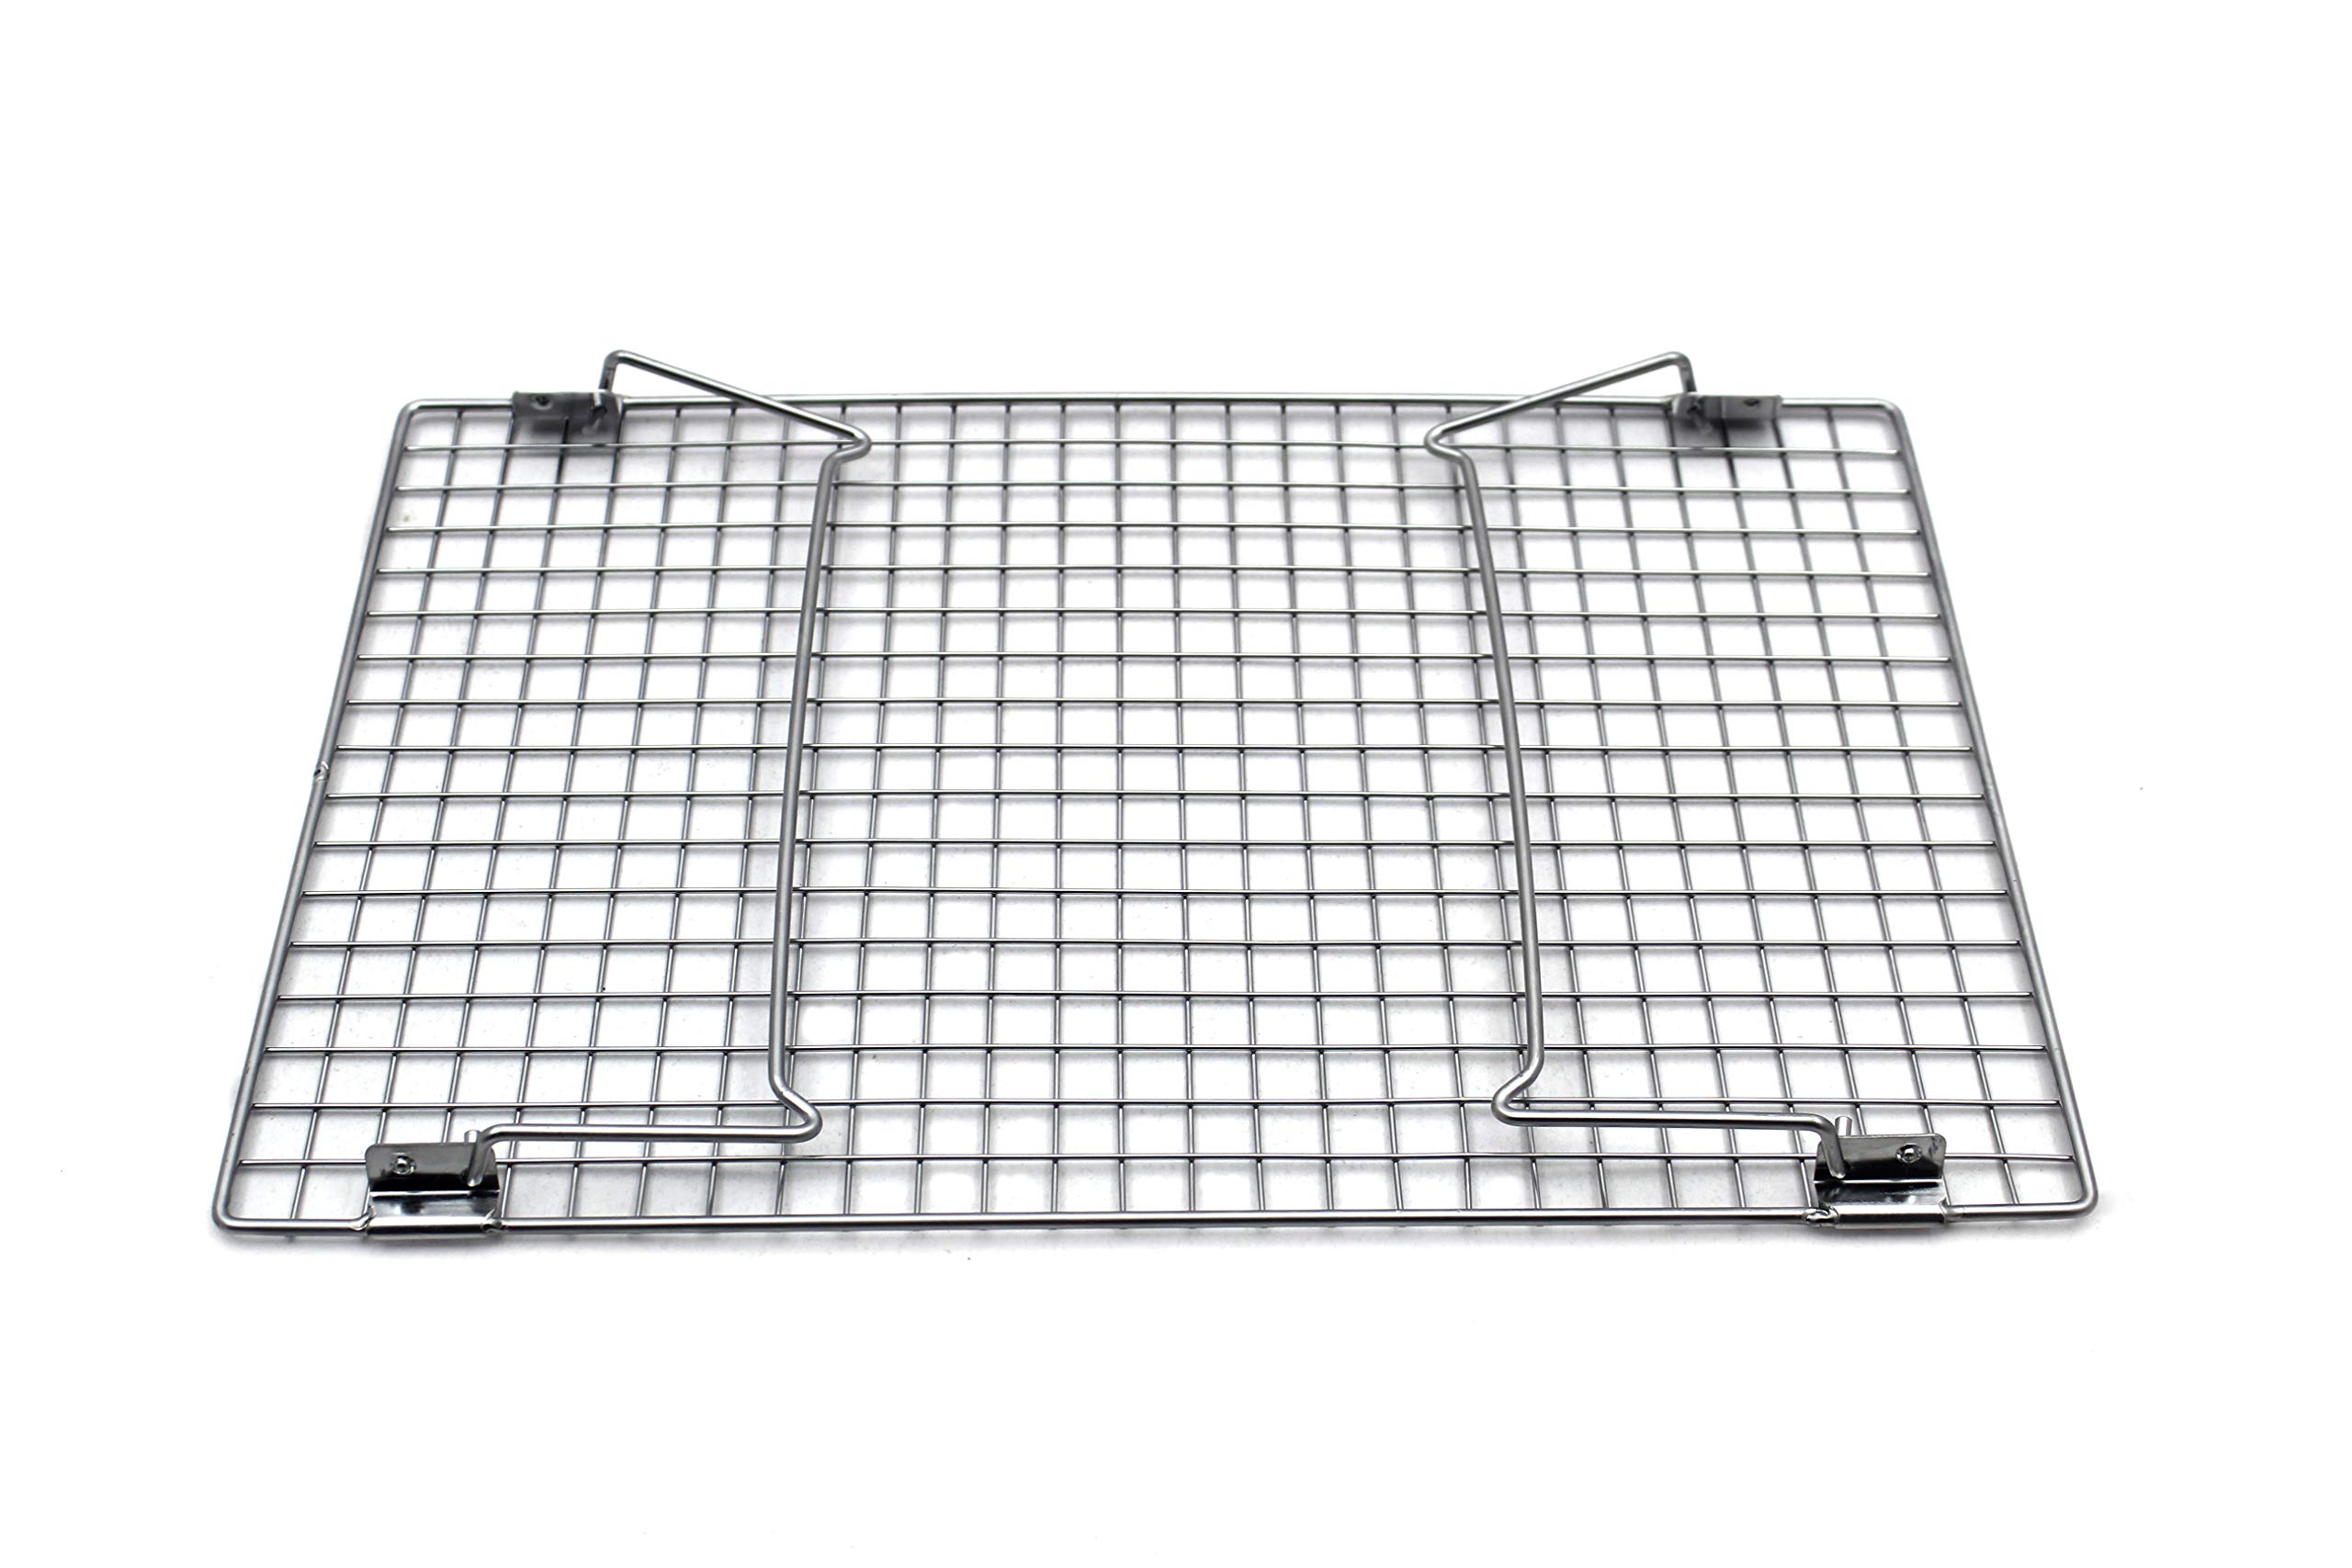 Checkered Chef Stainless Steel Stackable Cooling Racks - 2 Pack Stacking Cooling/Baking Racks - Each Rack 10 x 15" - Tiered Cooling Rack for Cooking, Cooling and Baking - Oven and Dishwasher Safe